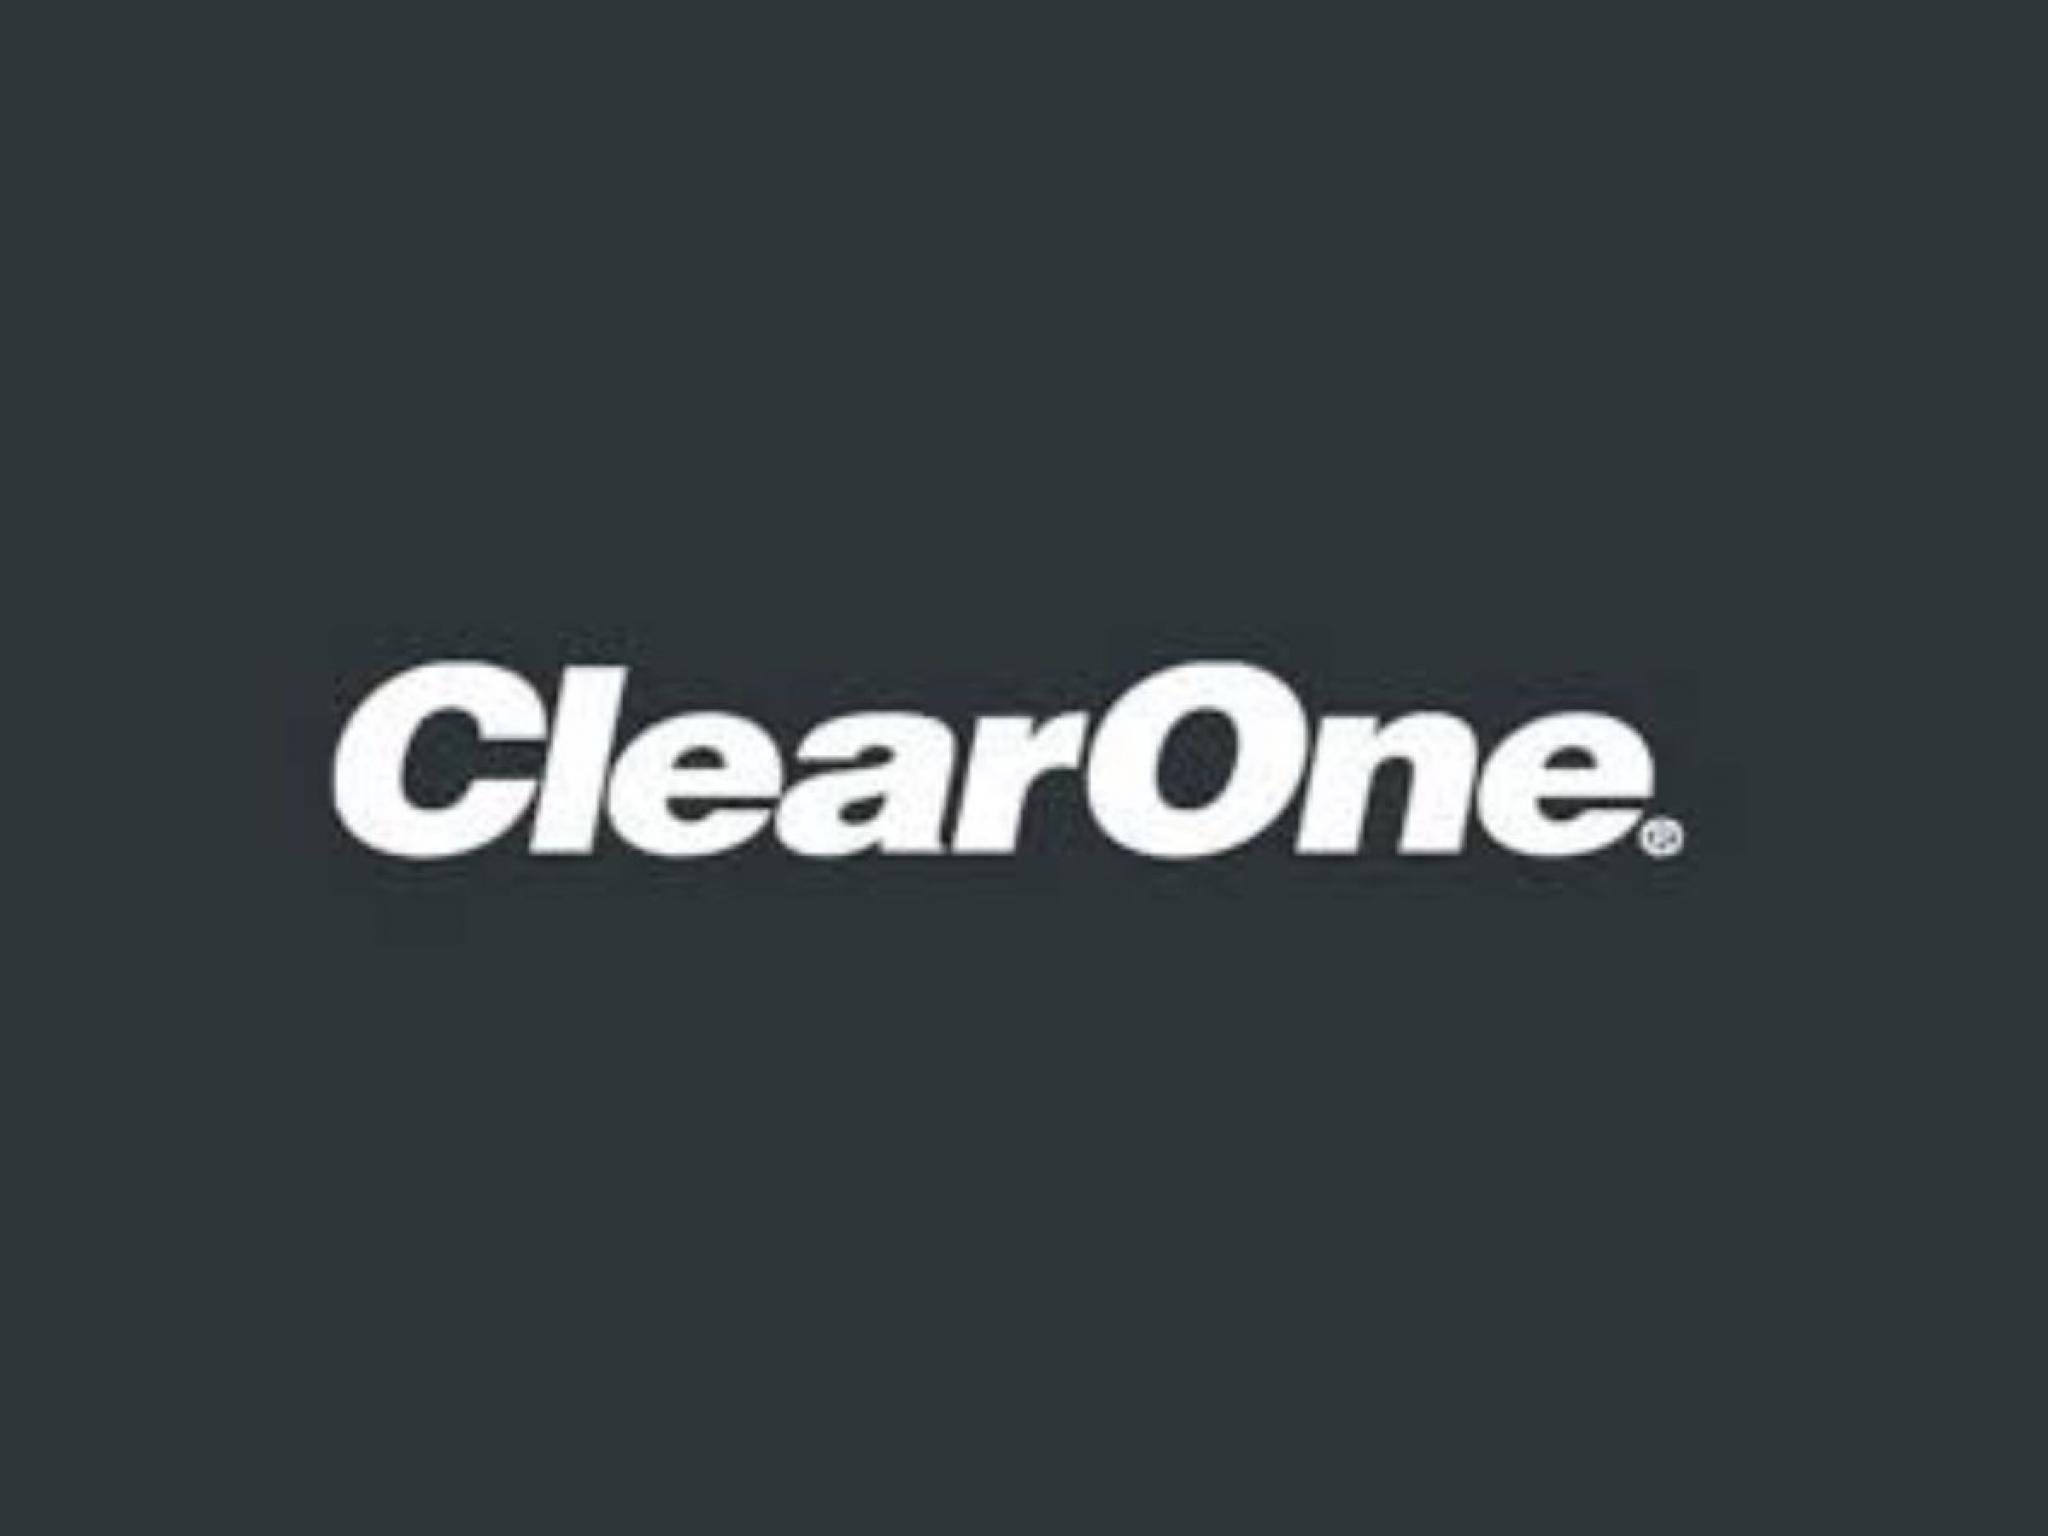  why-clearone-shares-are-trading-higher-by-47-here-are-20-stocks-moving-premarket 